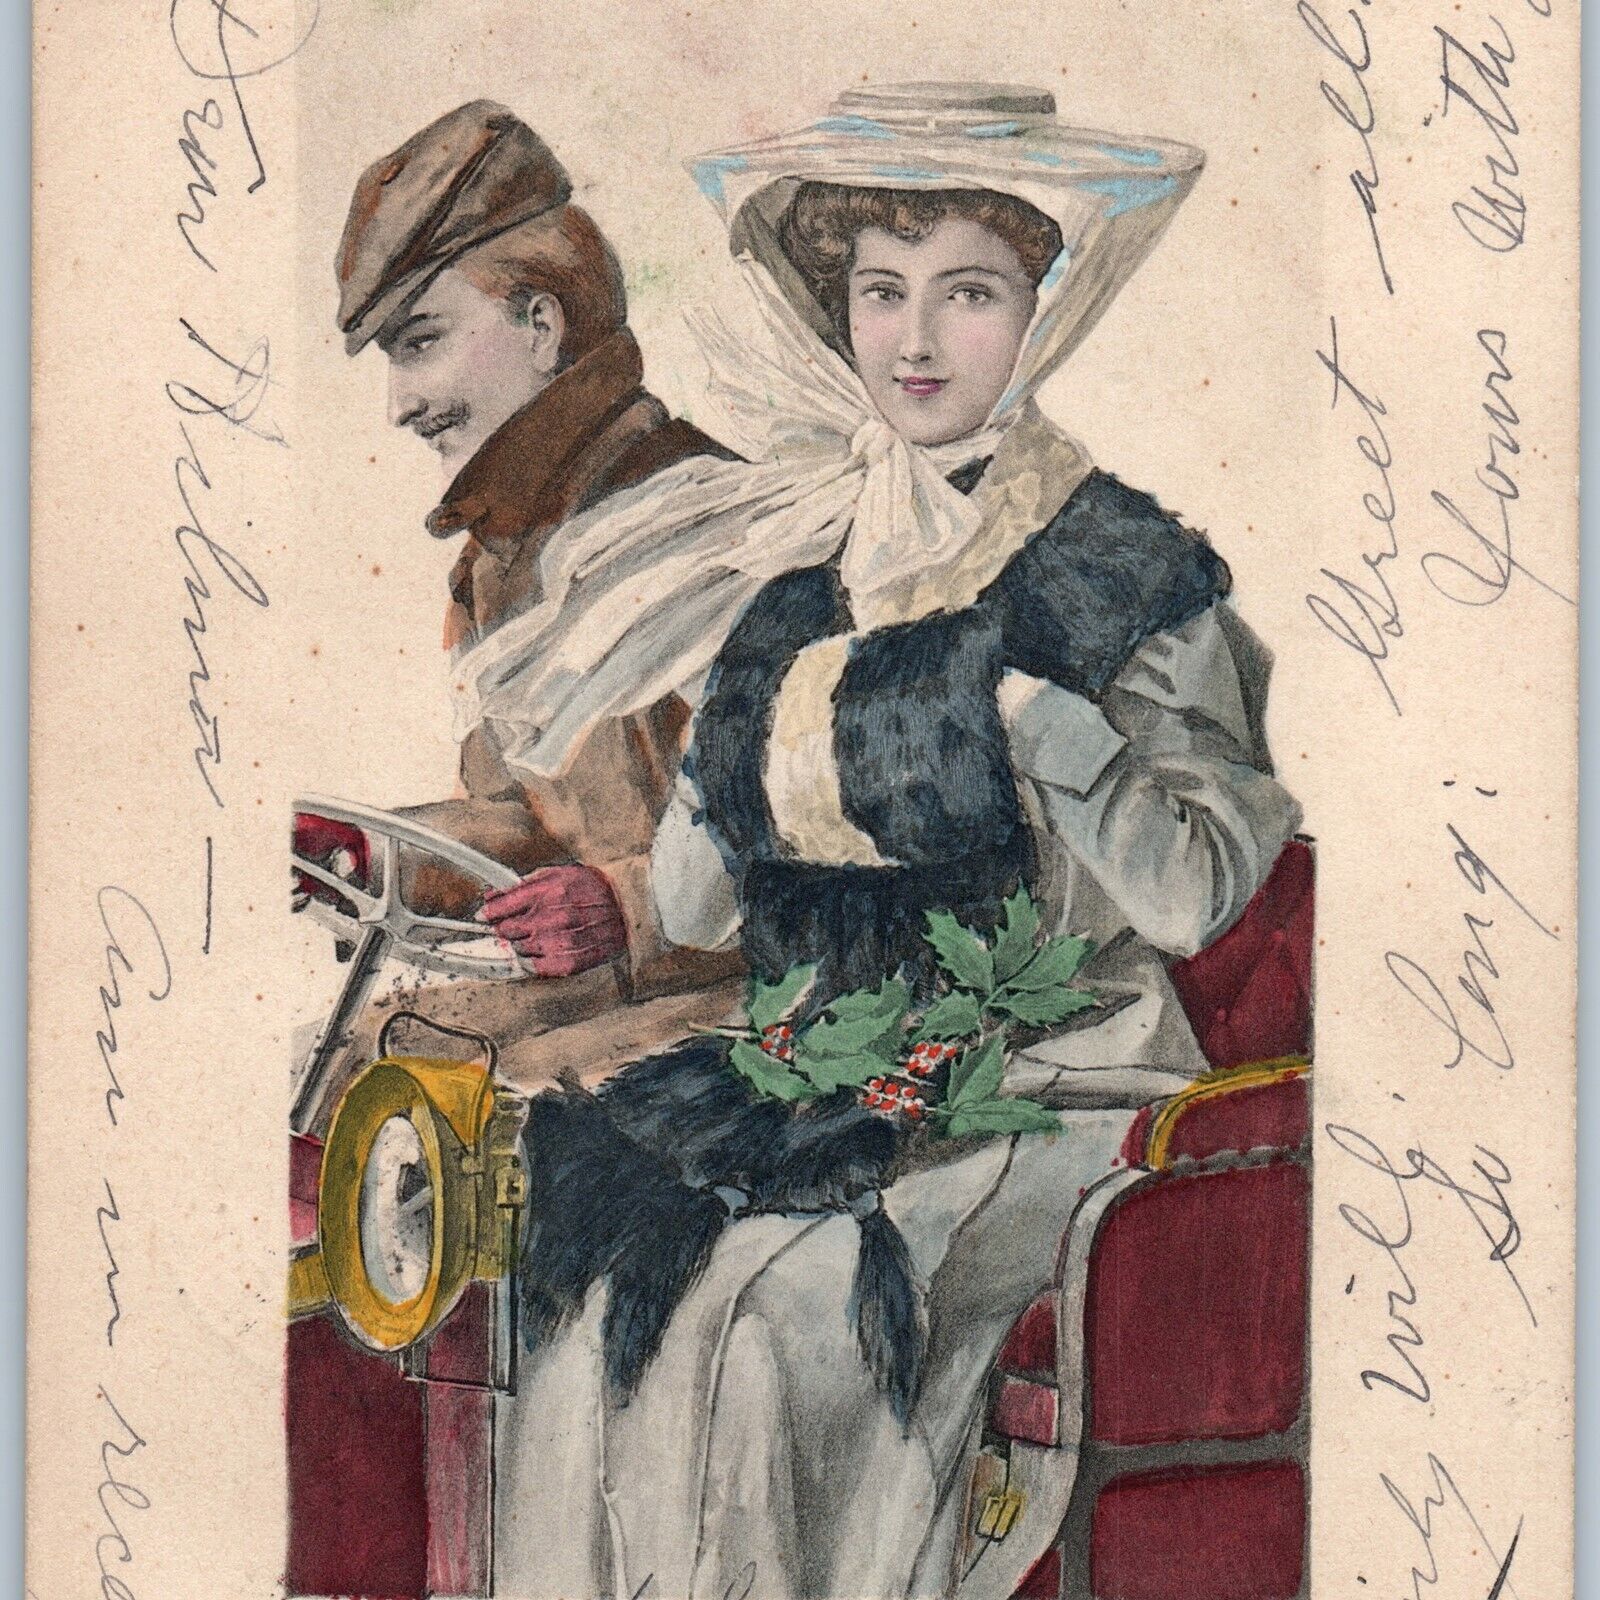 c1900s UDB Man Driving Early Touring Car Woman Hand Warmer Art Hand Colored A190